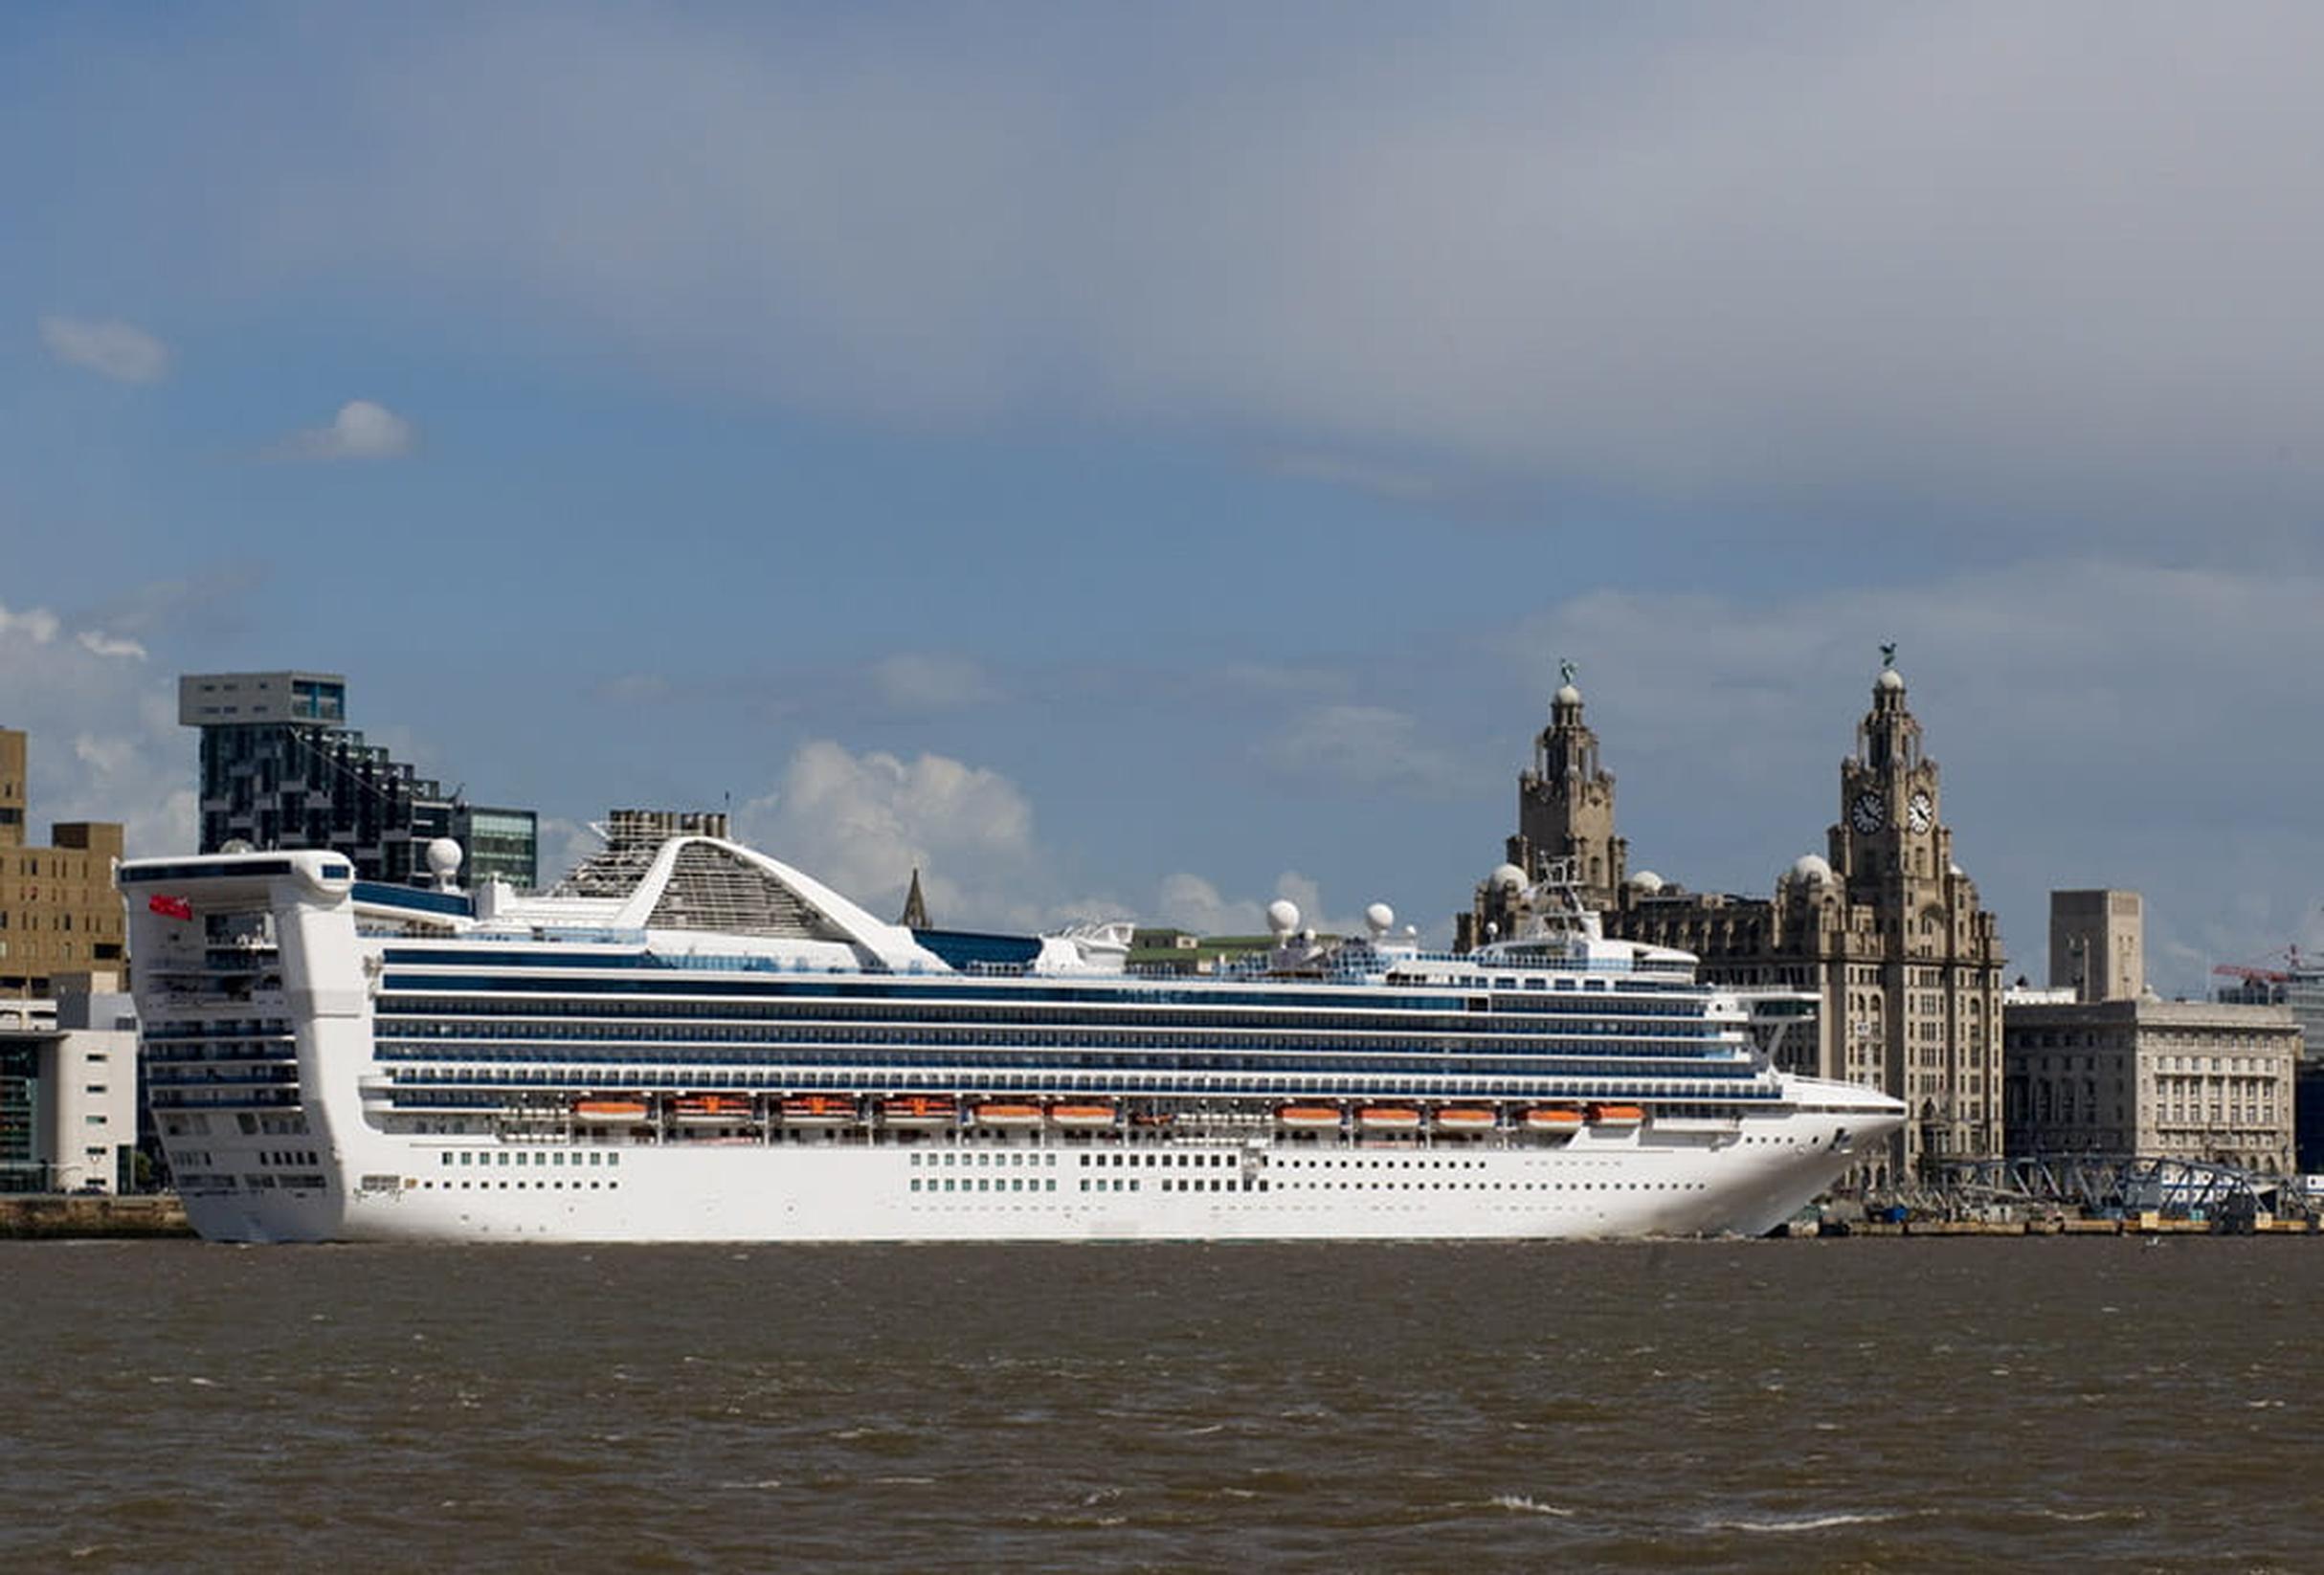 Cruise ships embark in the centre of Liverpool